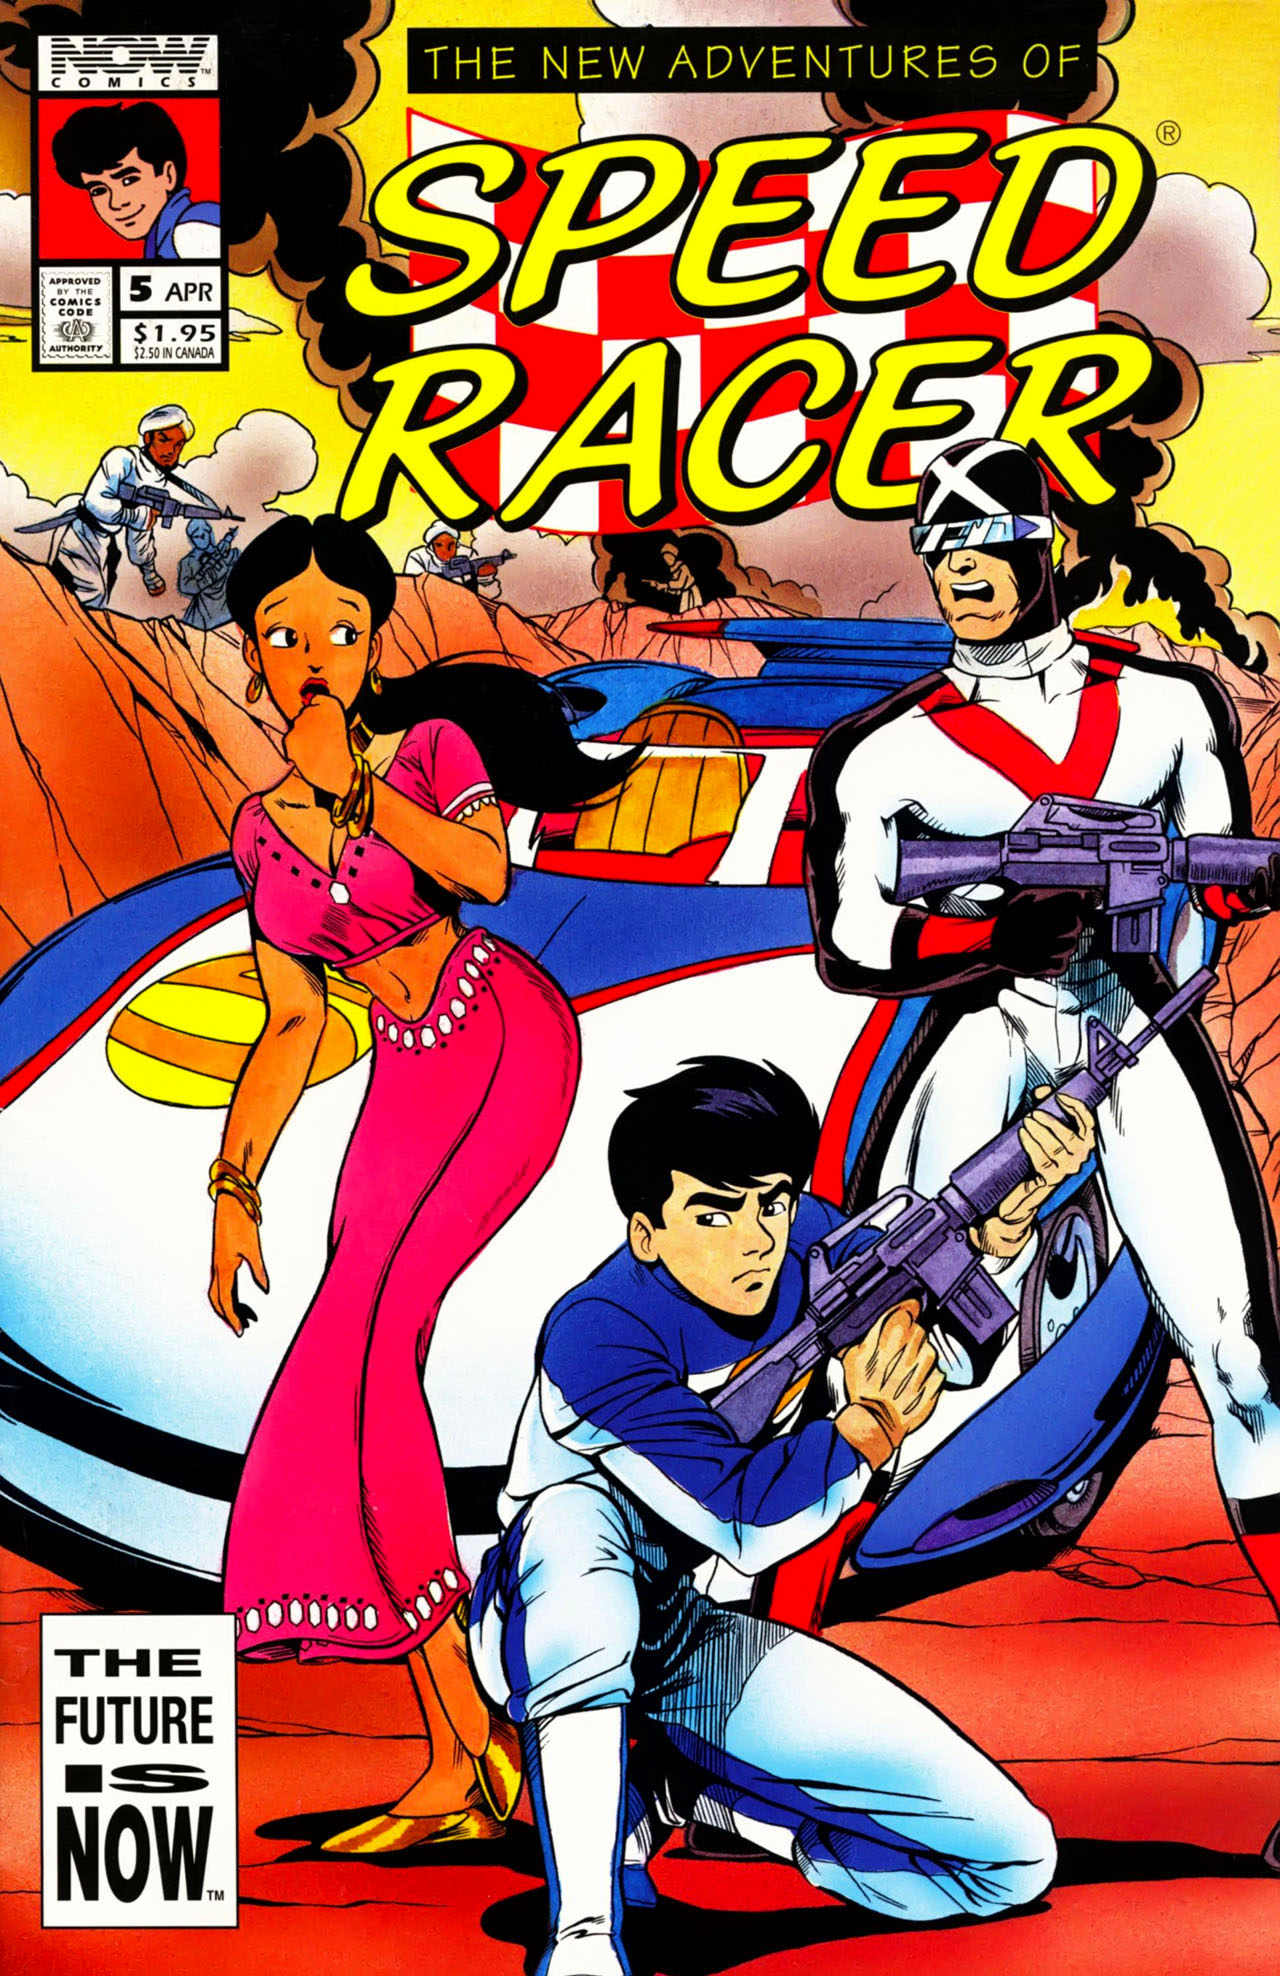 The New Adventures Of Speed Racer Issue 5 | Read The New Adventures Of Speed  Racer Issue 5 comic online in high quality. Read Full Comic online for free  - Read comics